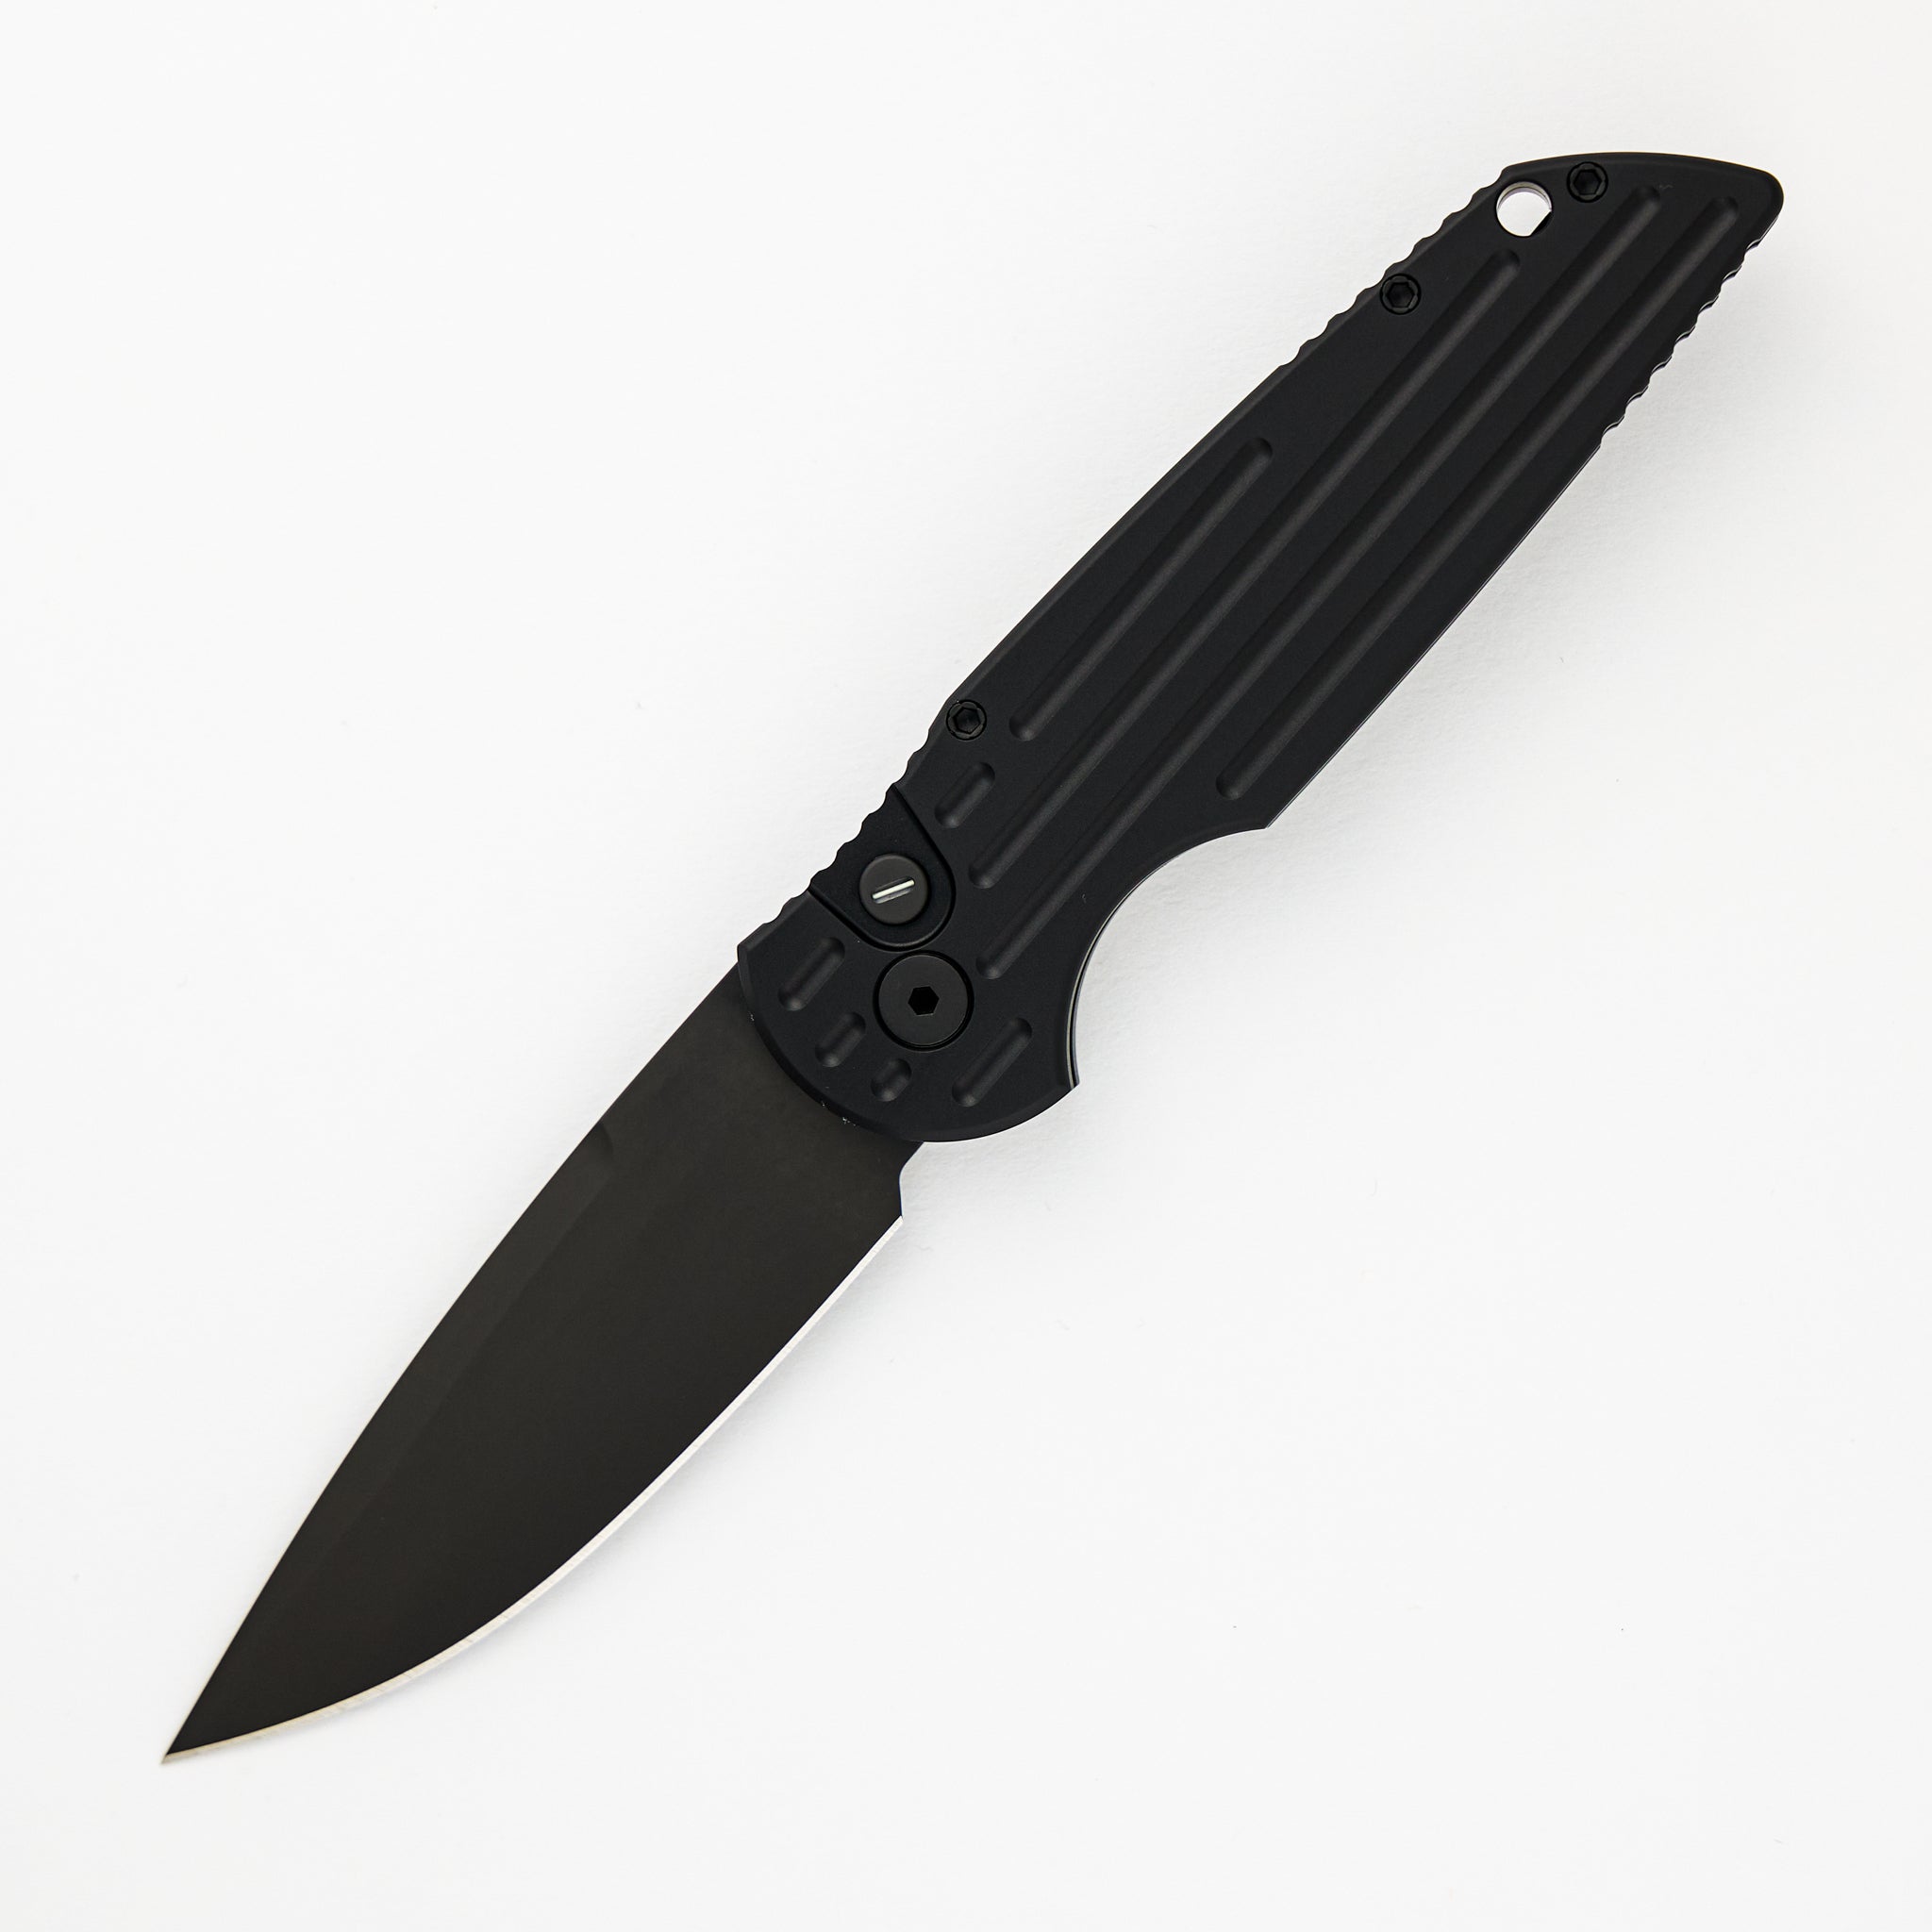 Pro-Tech Knives Tactical Response 3 Auto - Black Handle With Grooves - Tritium Push Button - Black Blade - Black Hardware TR3-SWAT-OPERATOR